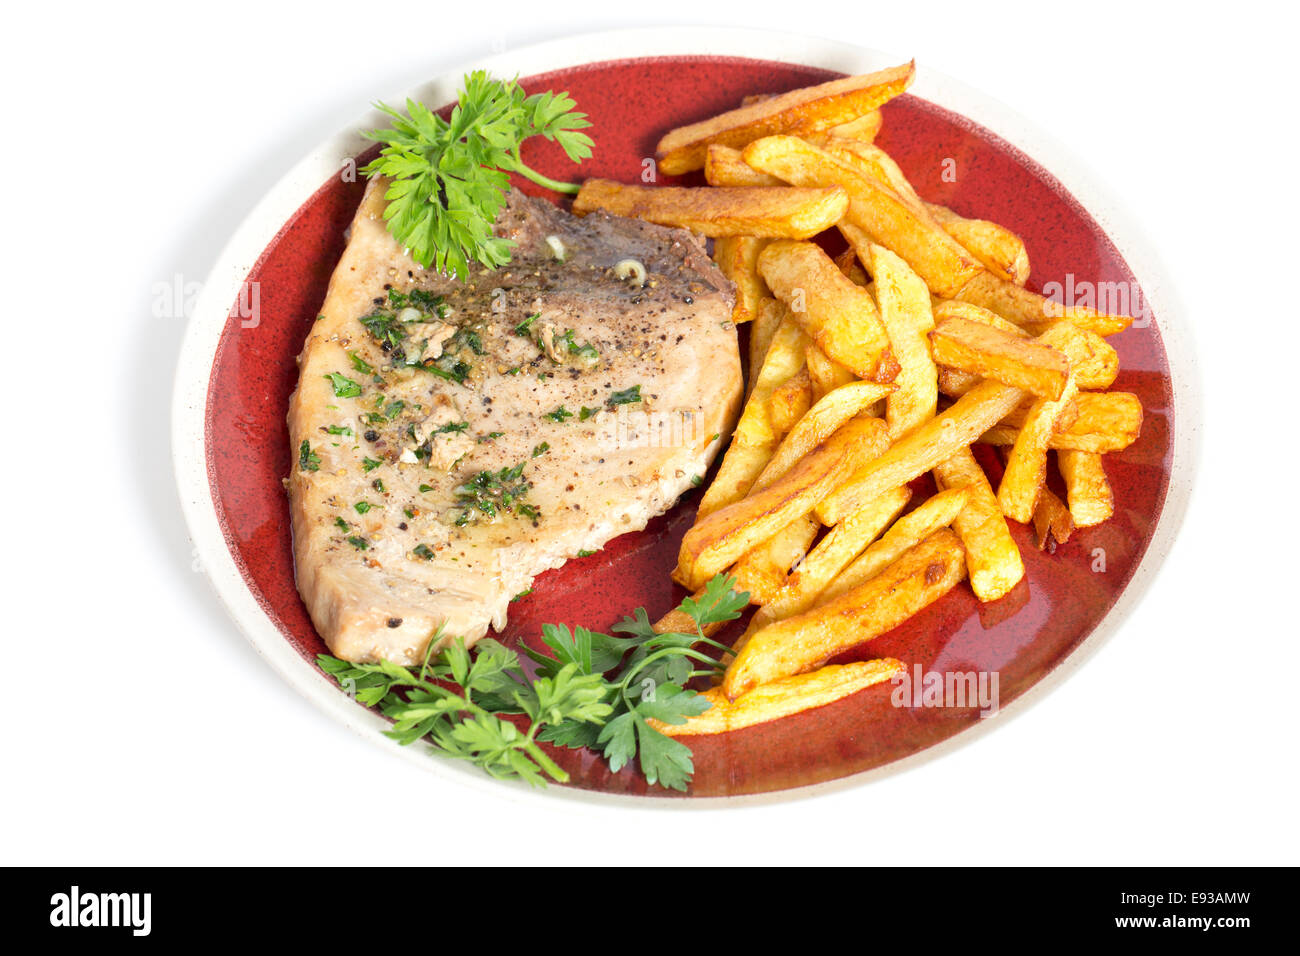 Swordfish steak cooked on a plate with french fries and a parsley and garlic butter sauce Stock Photo